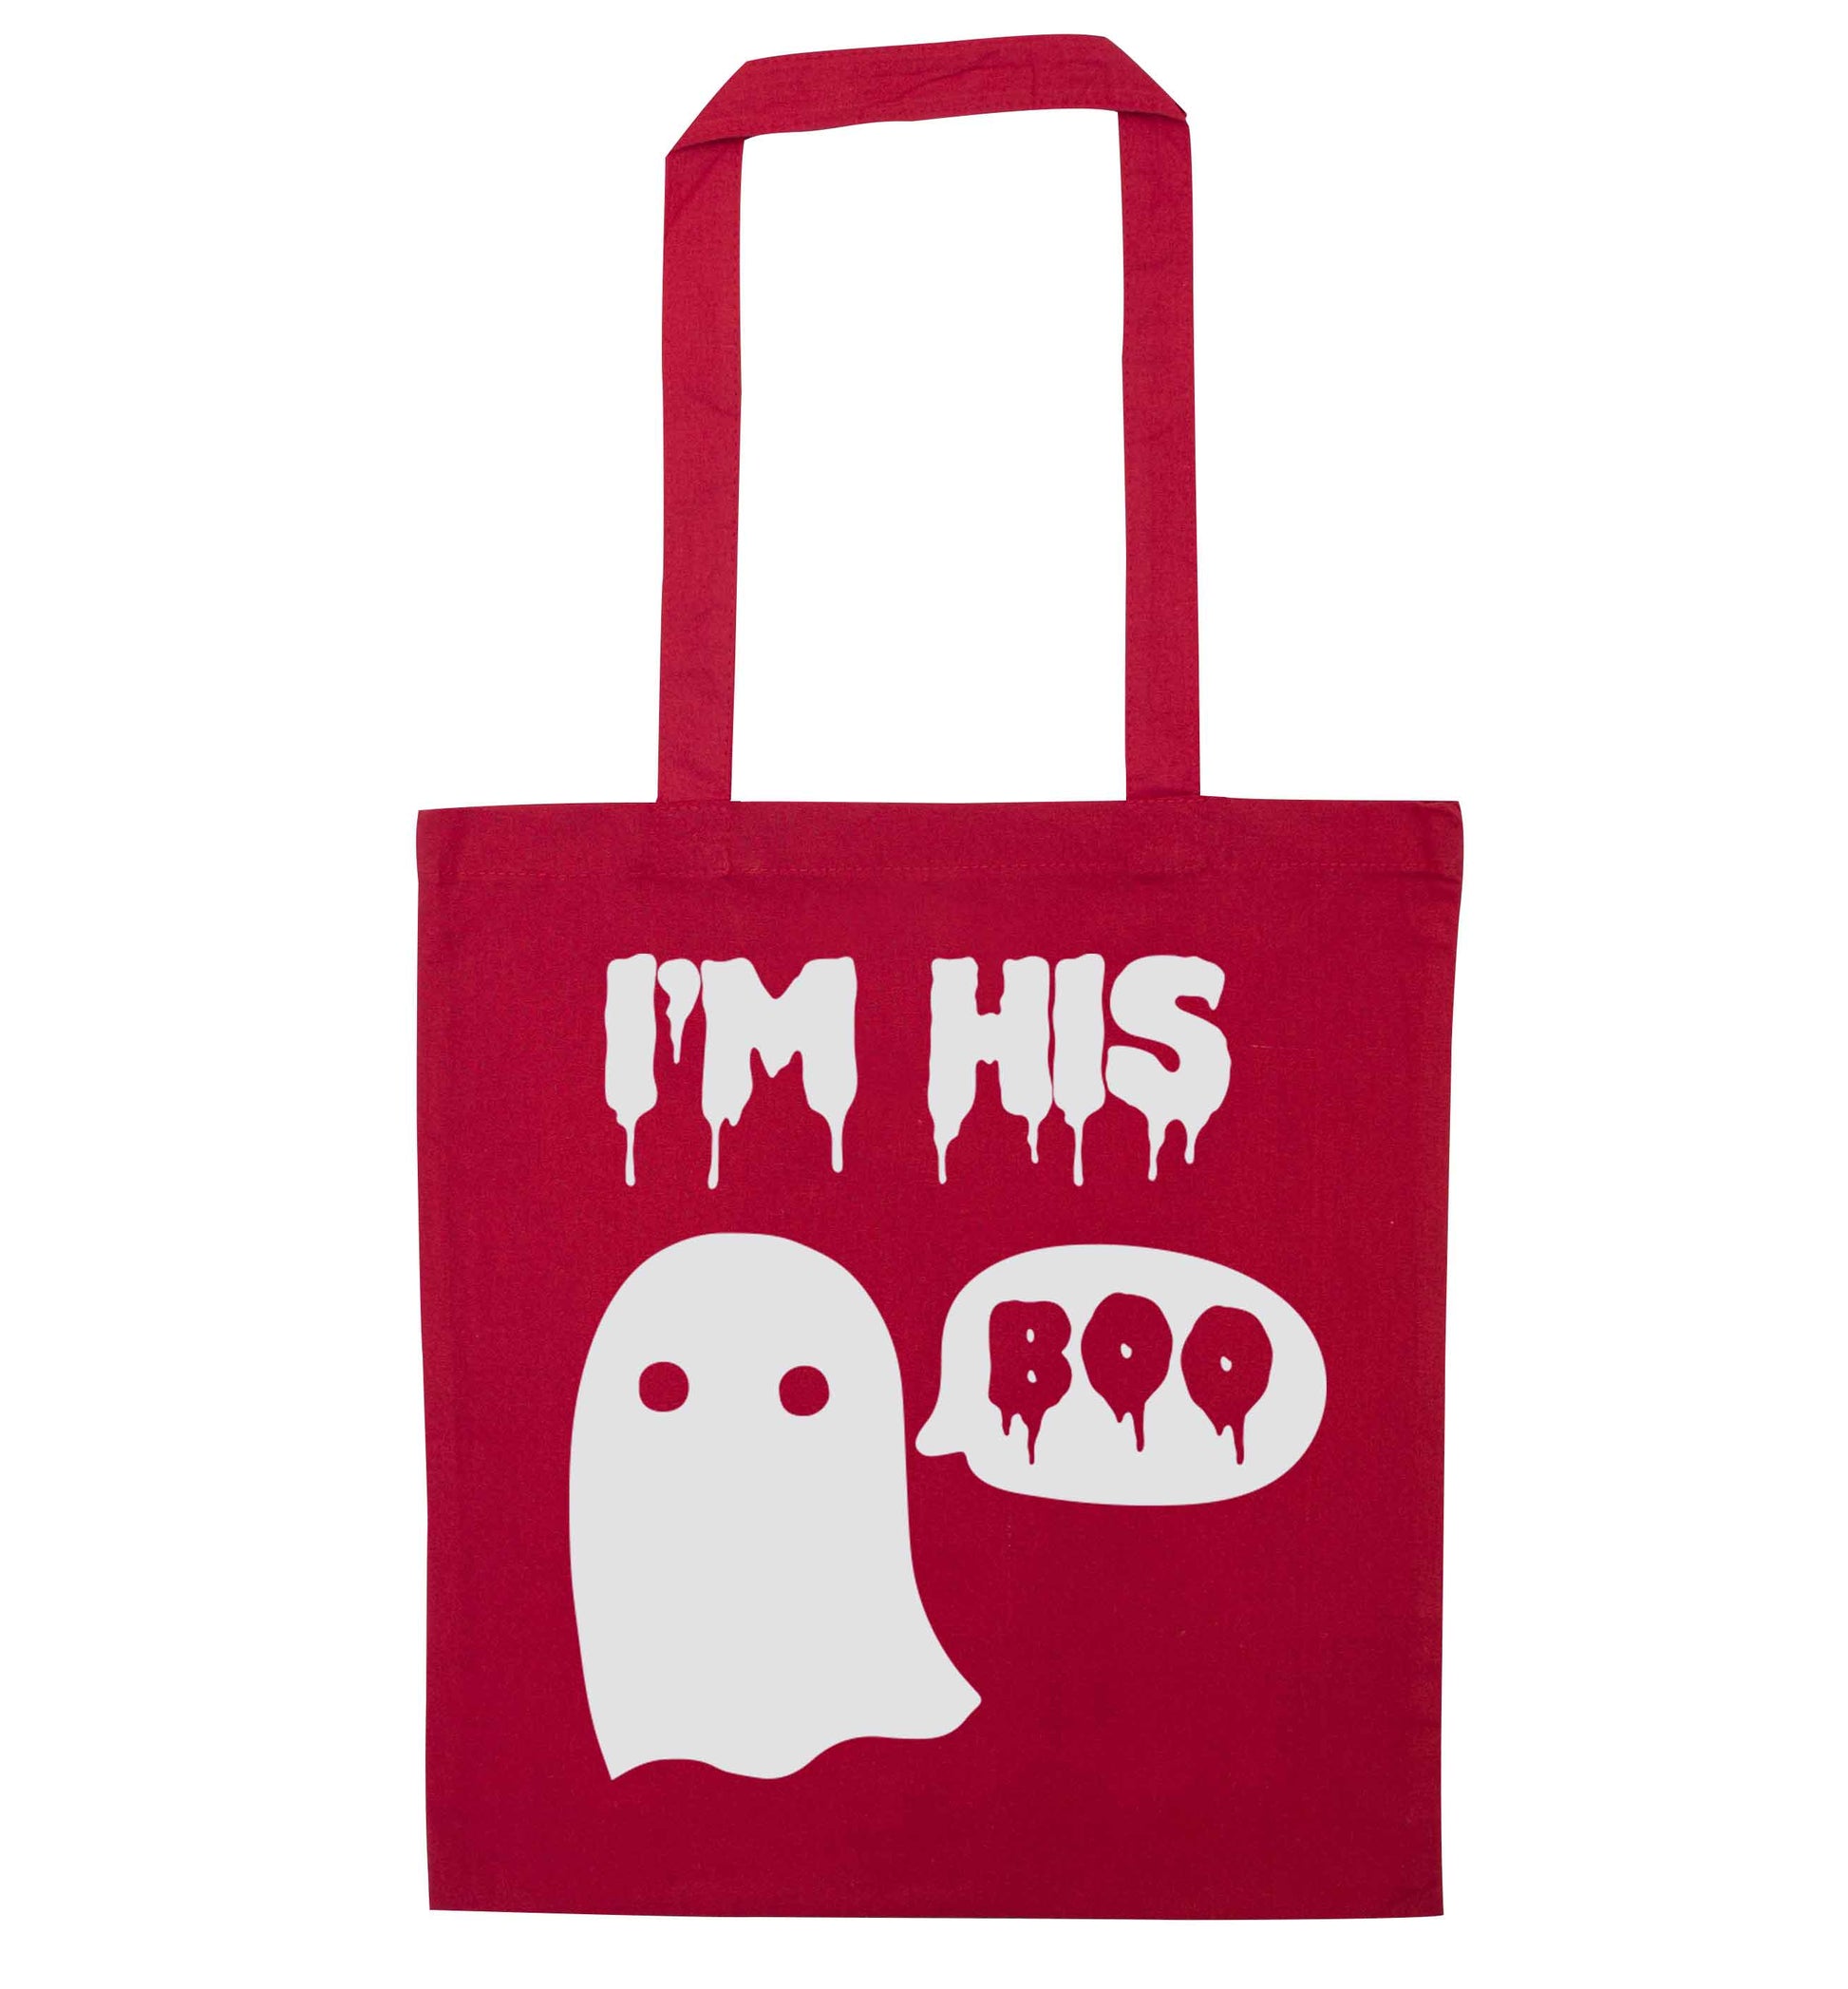 I'm his boo red tote bag